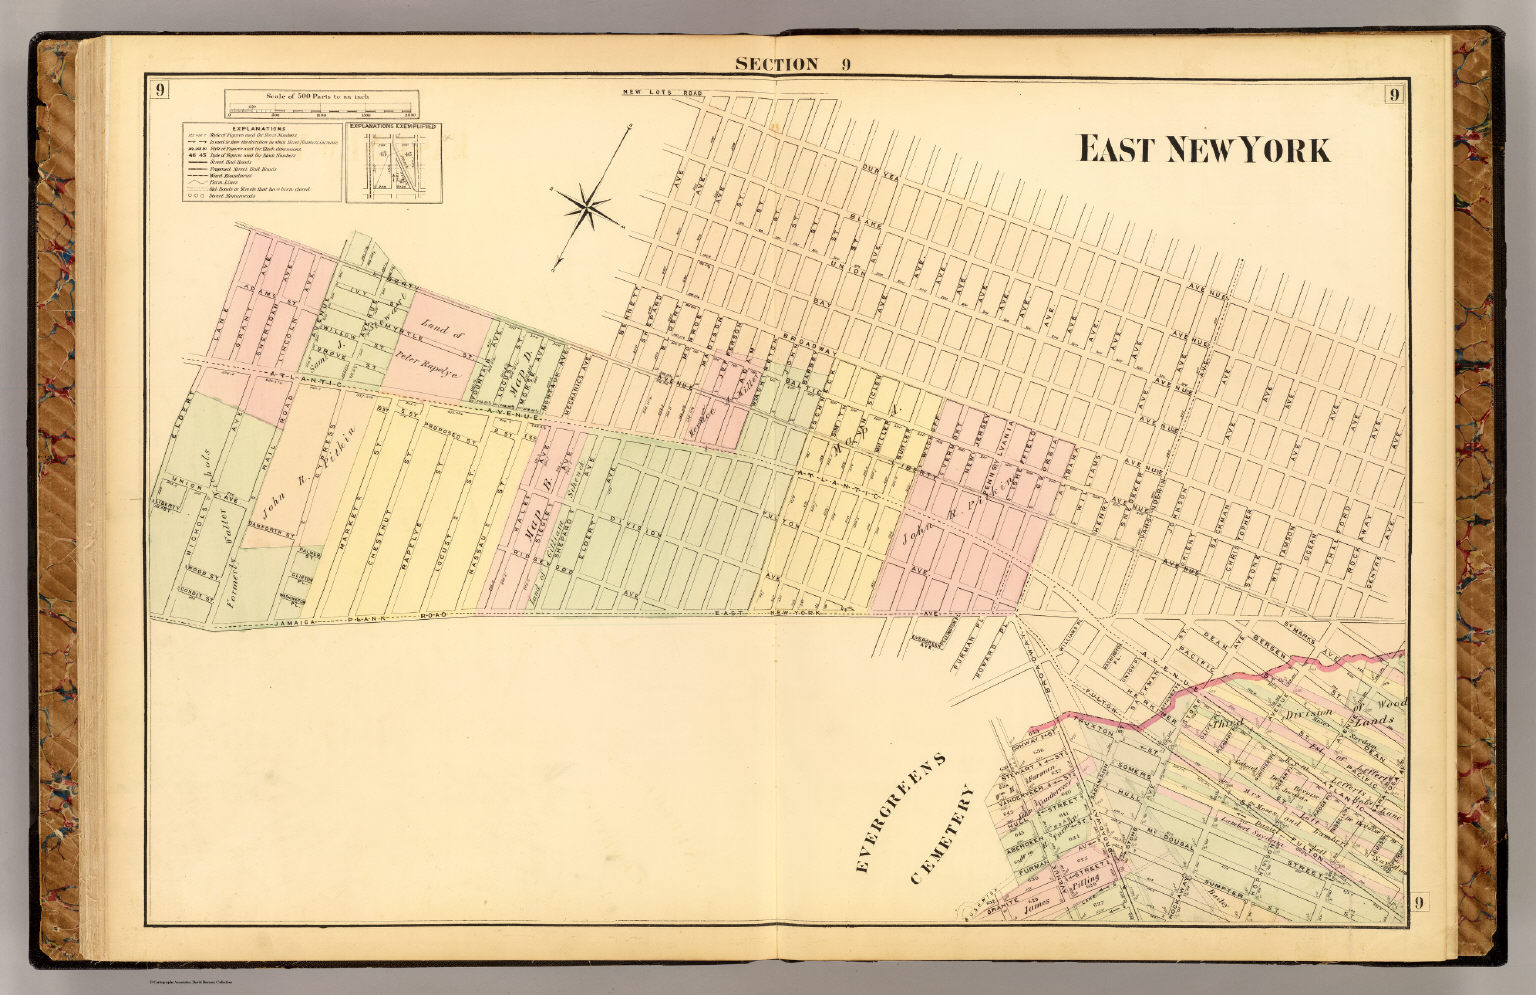 East New York Brooklyn Map Sec. 9 East New York.   David Rumsey Historical Map Collection